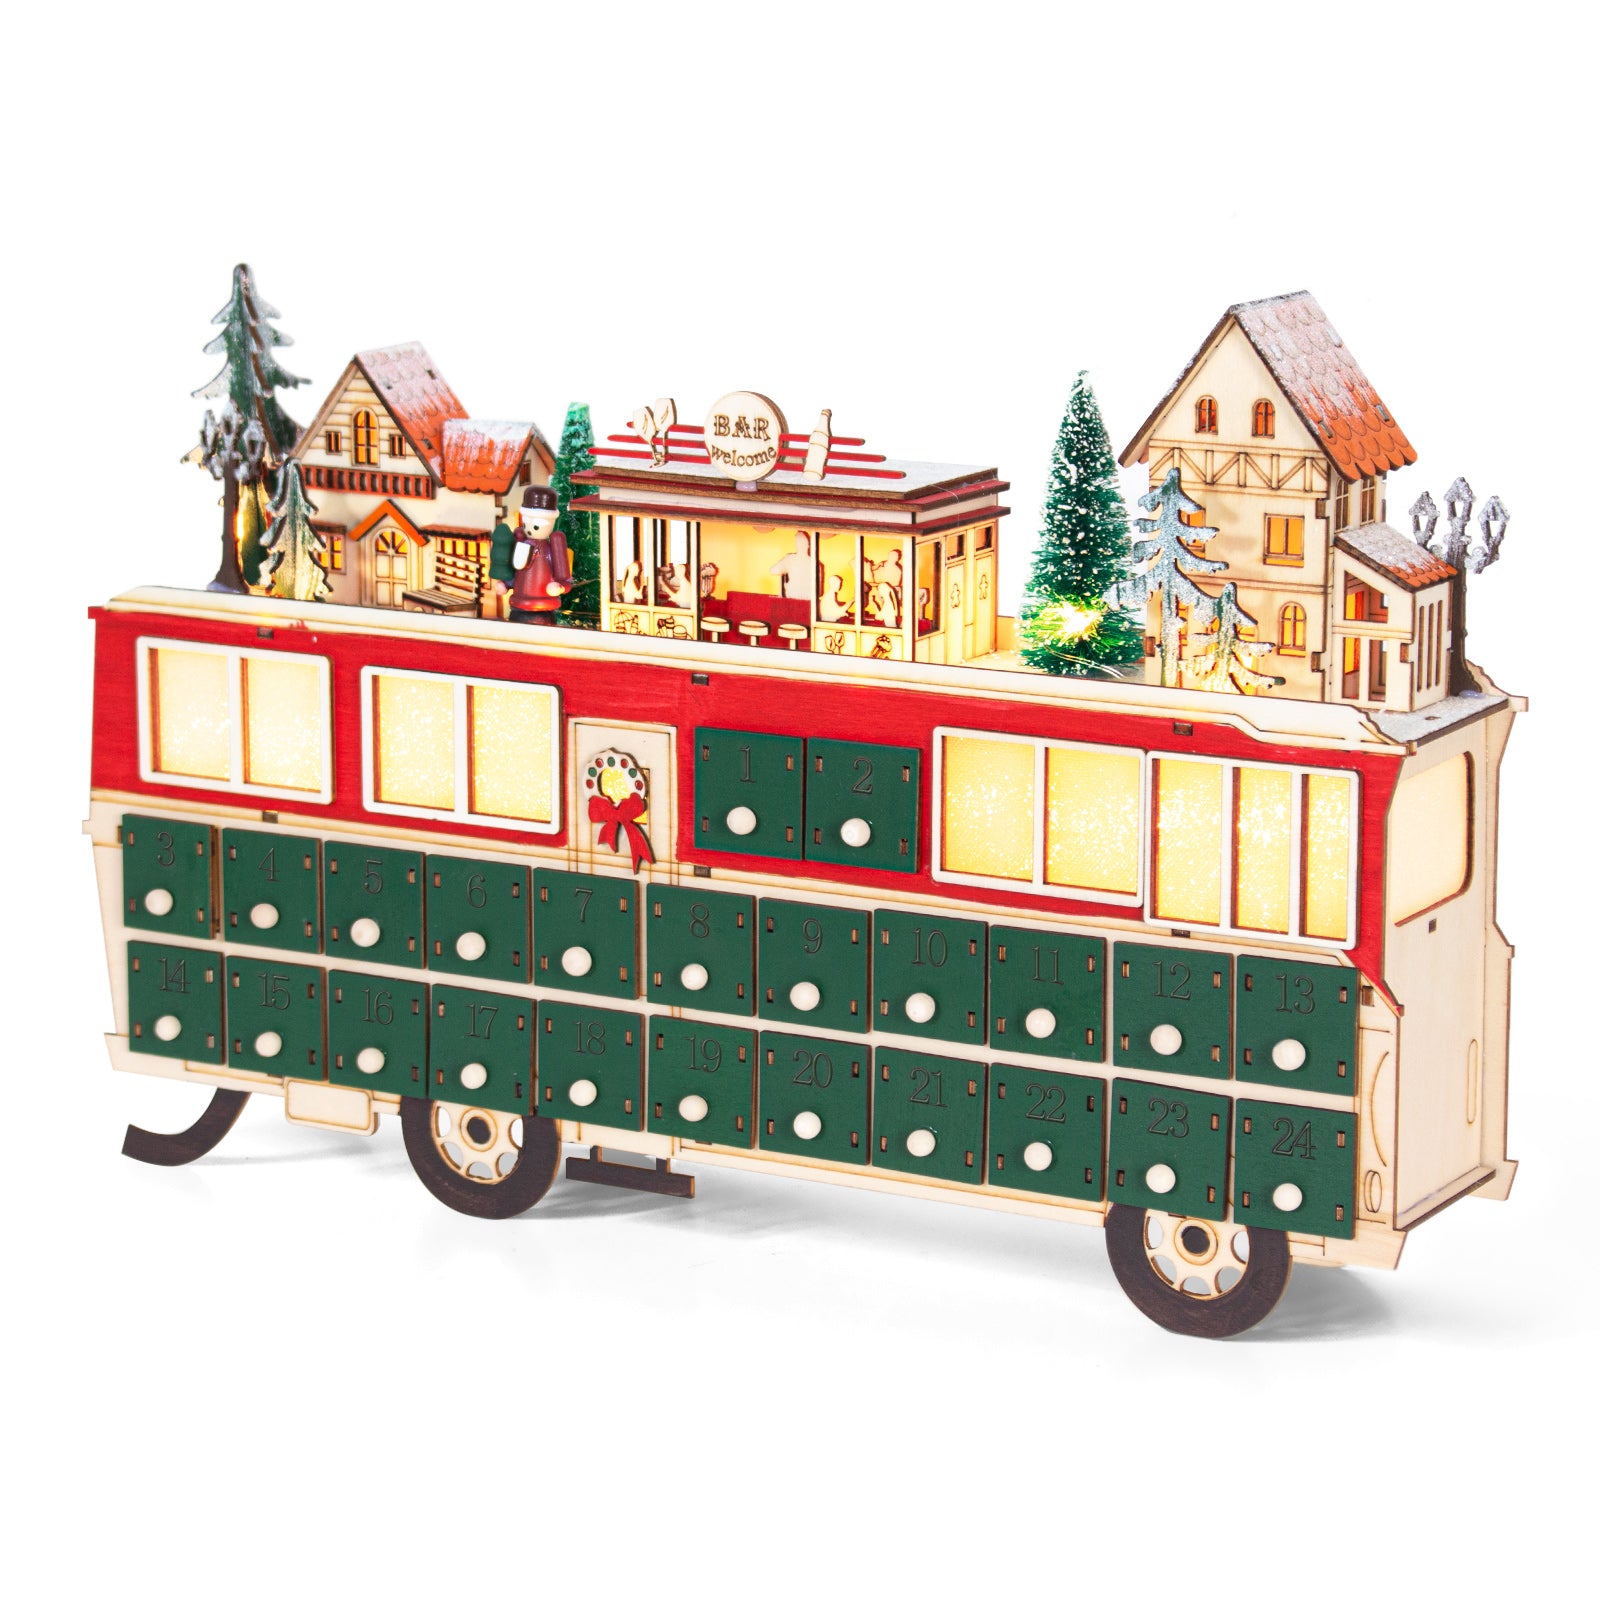 Todeco-Wooden-Advent-Calendar-24-Drawers-to-Fill-Illuminated-Advent-Calendar-Bus-Shape-Wooden-Christmas-Decoration-43-x-8-5-x-28-cm-Wooden-Advent-Calendar